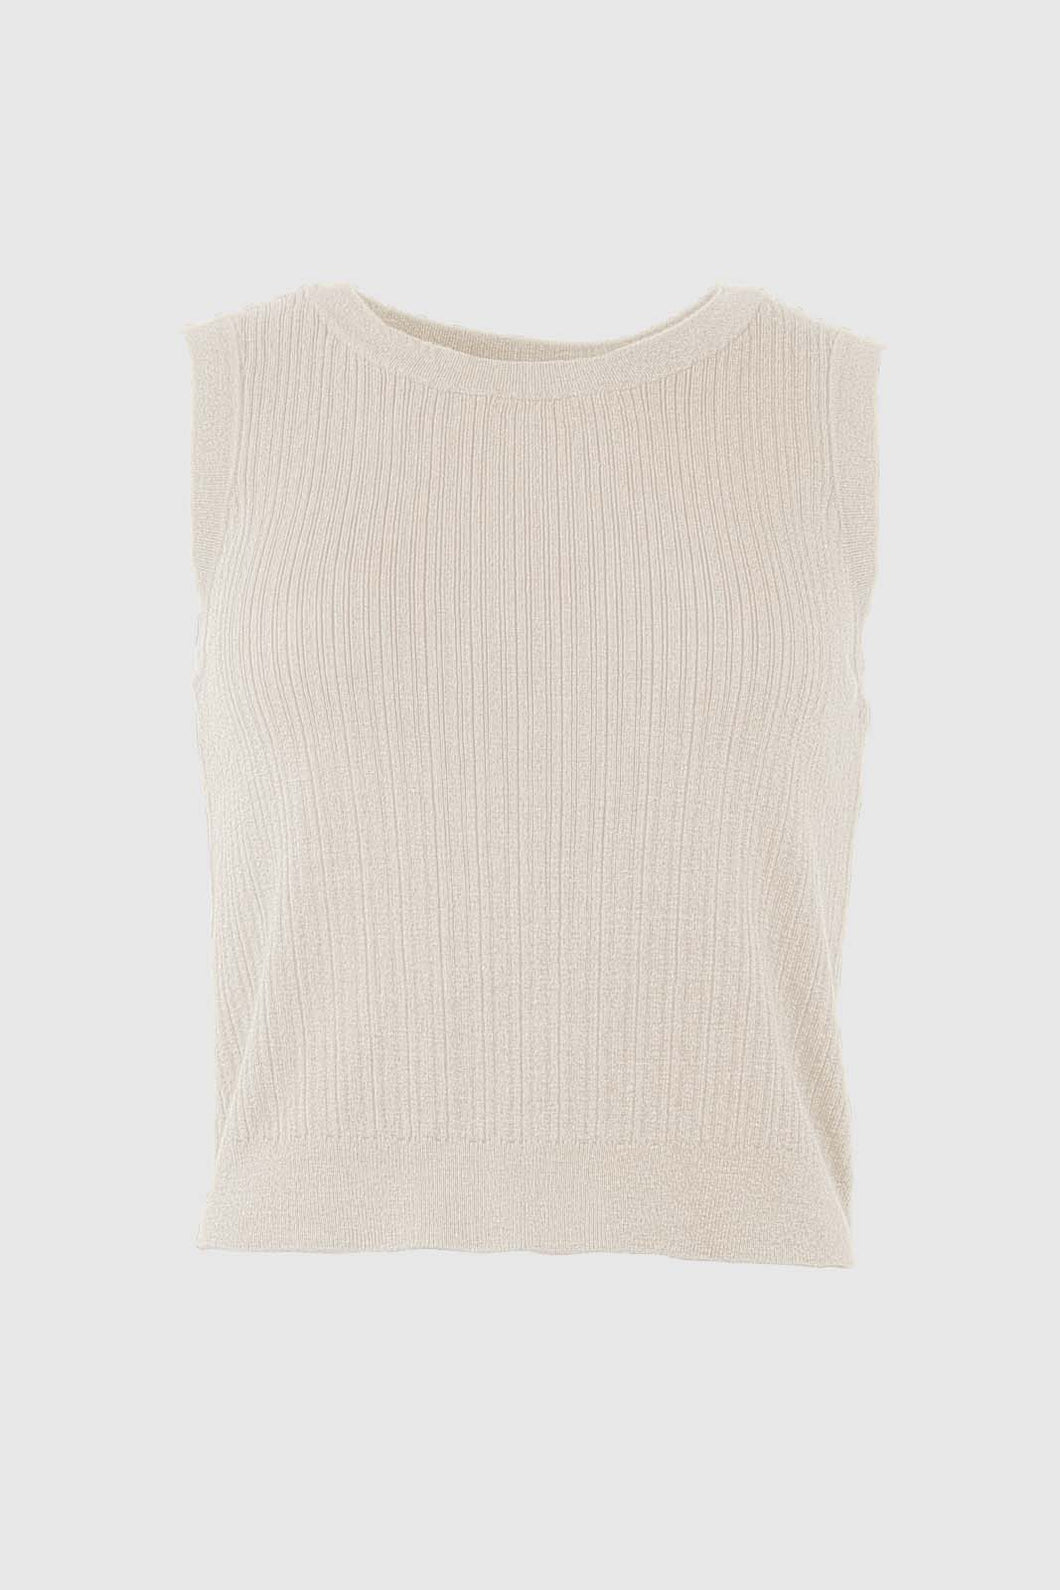 GIESELE KNIT RIBBED TANK TOP - SILVER LINING